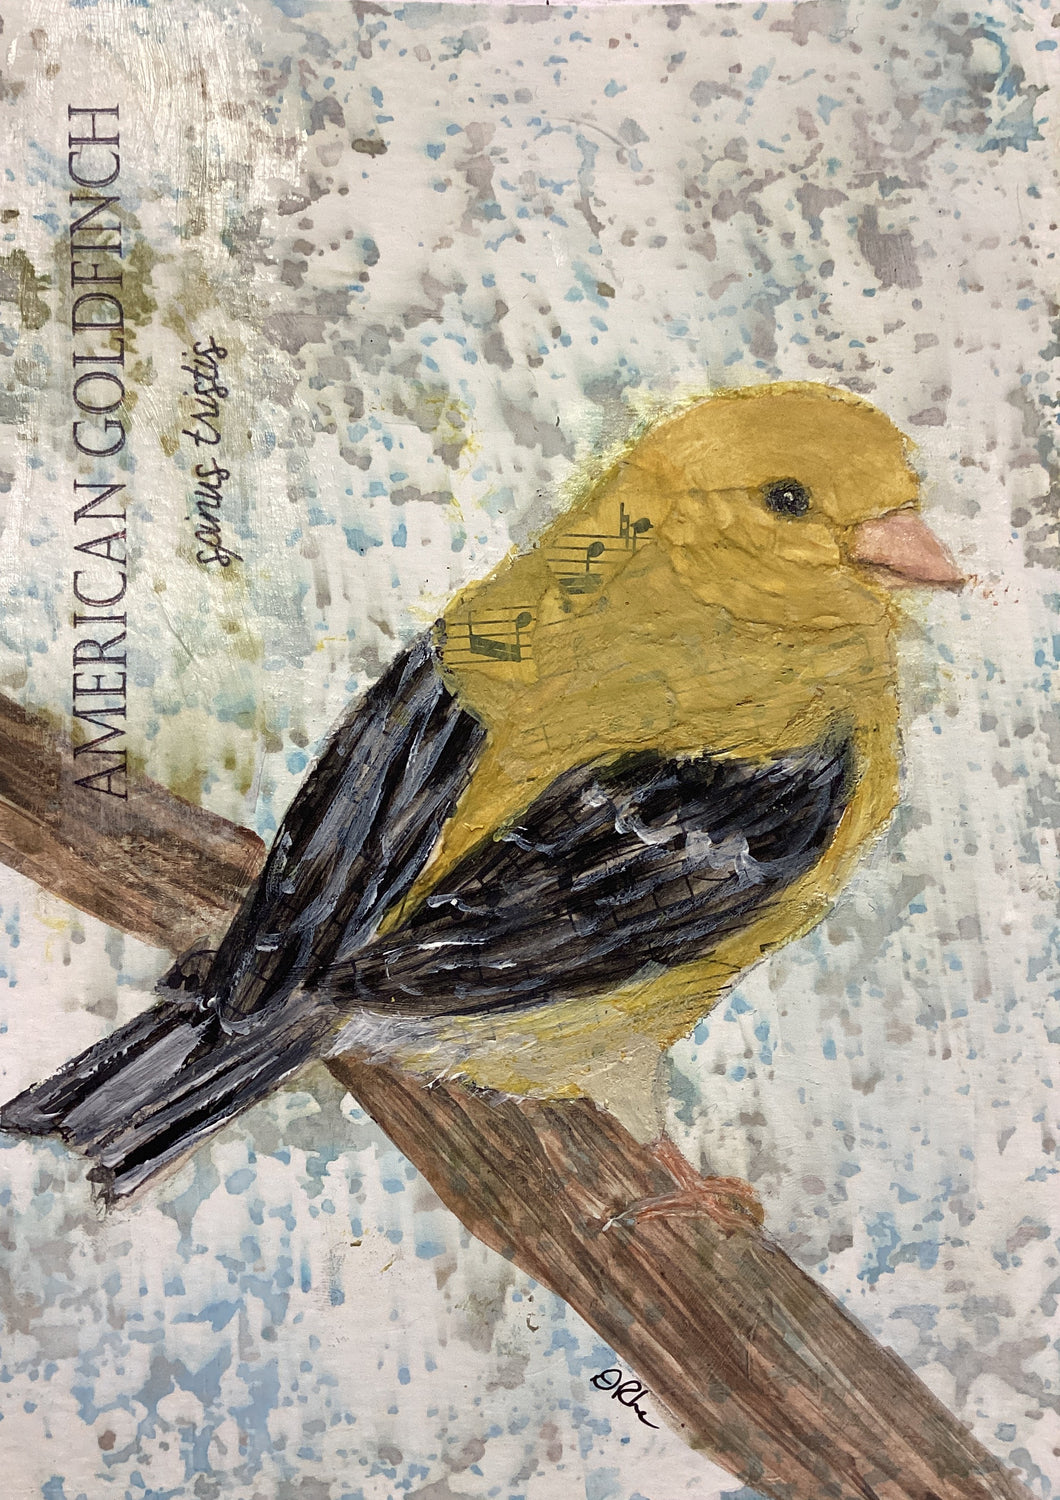 American Goldfinch, 5x7 original mixed media painting, Day 25/100